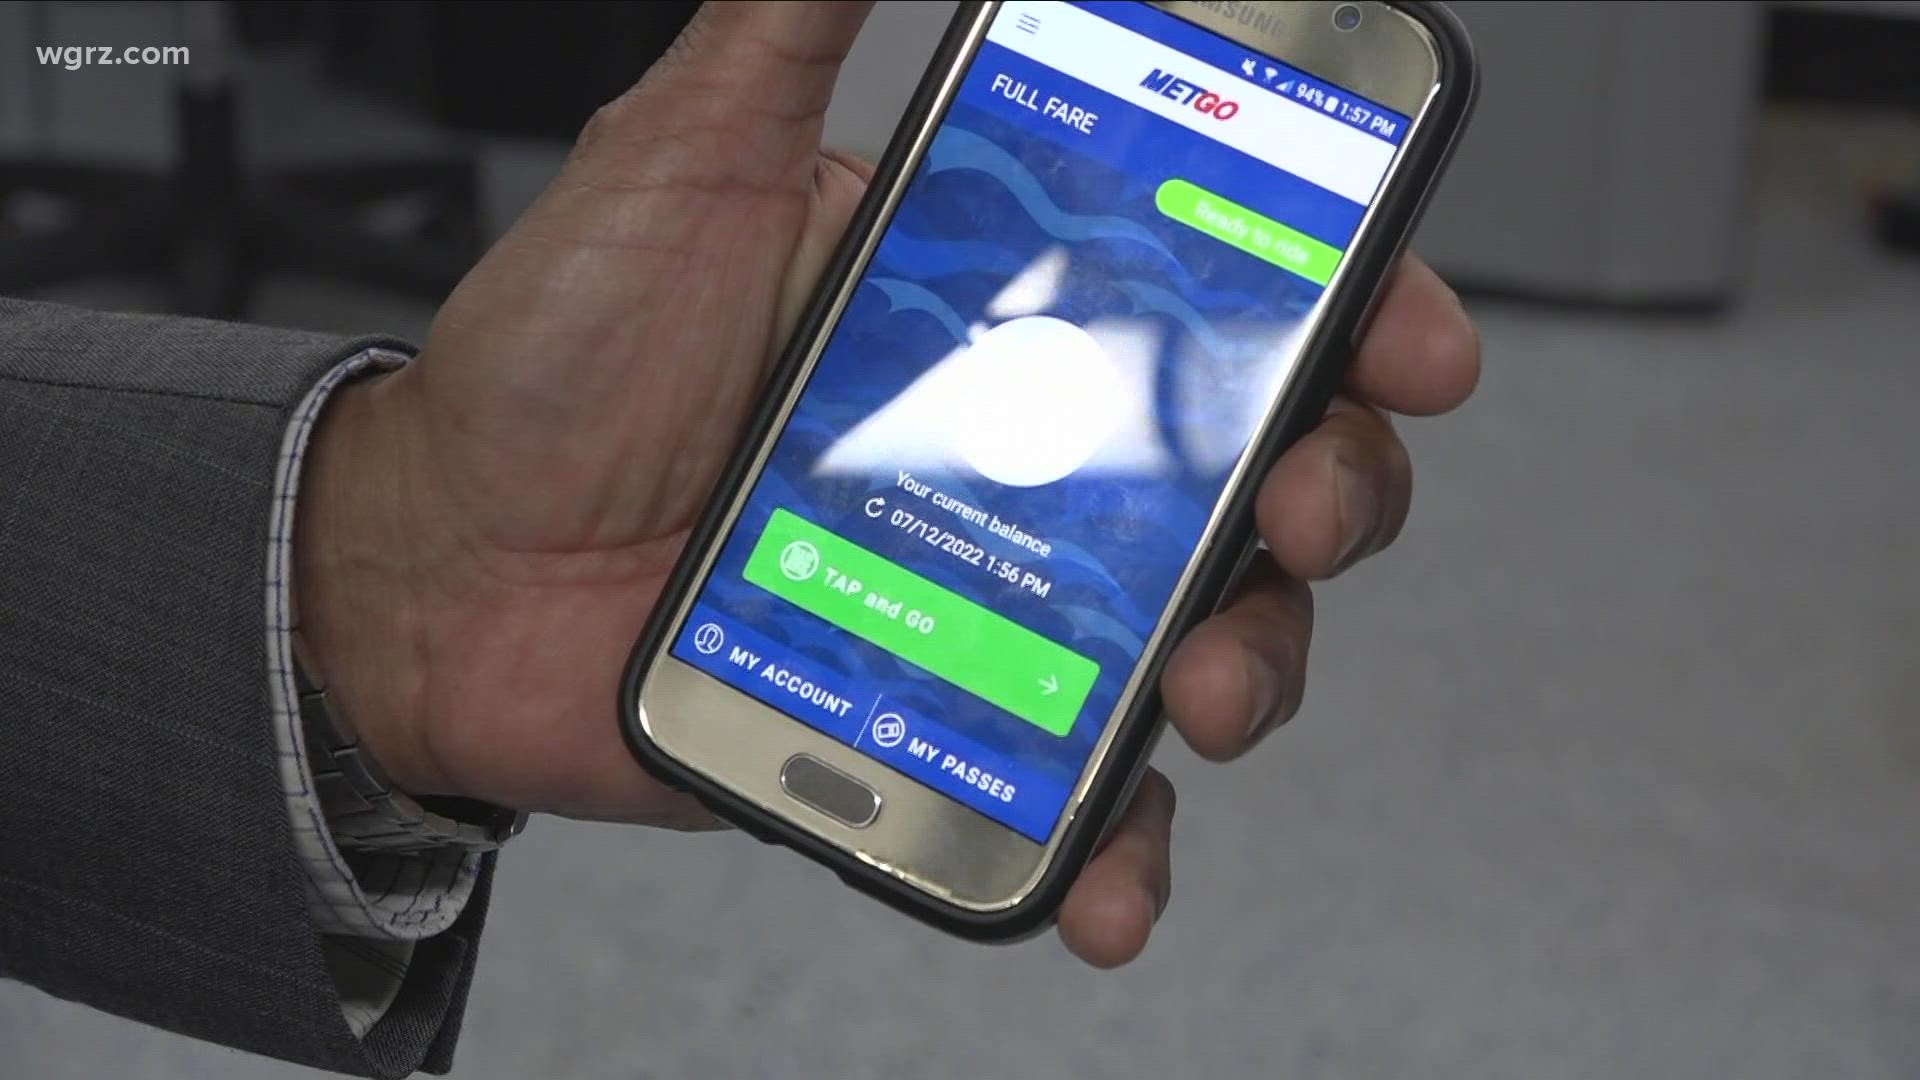 The app is part of the NFTA's upgrade to its entire fare collection system.